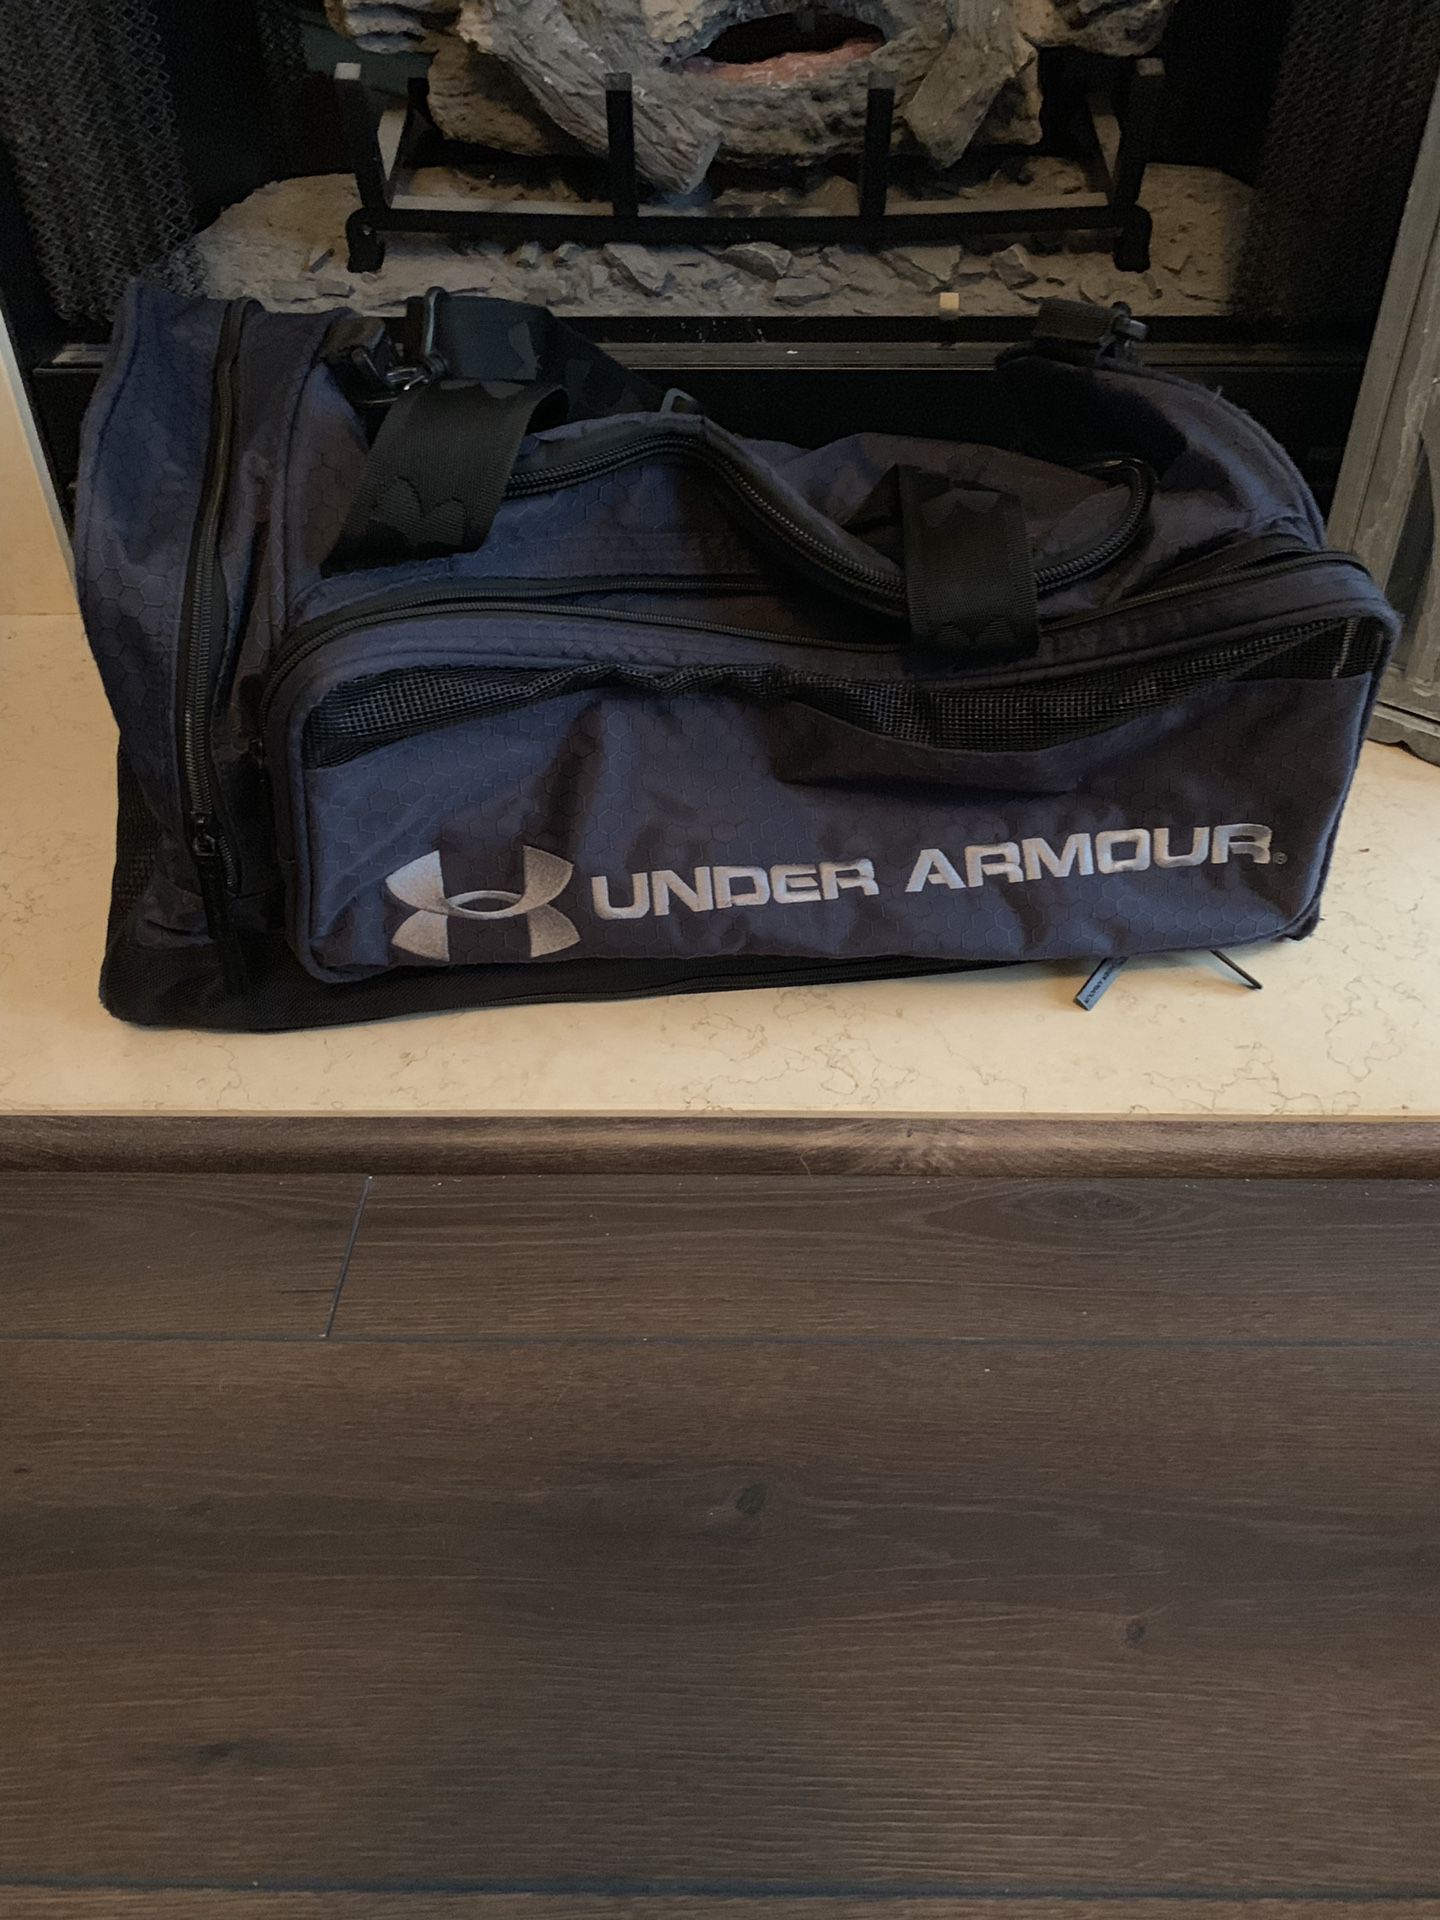 *Price Reduced* Under Armour Duffel Bag